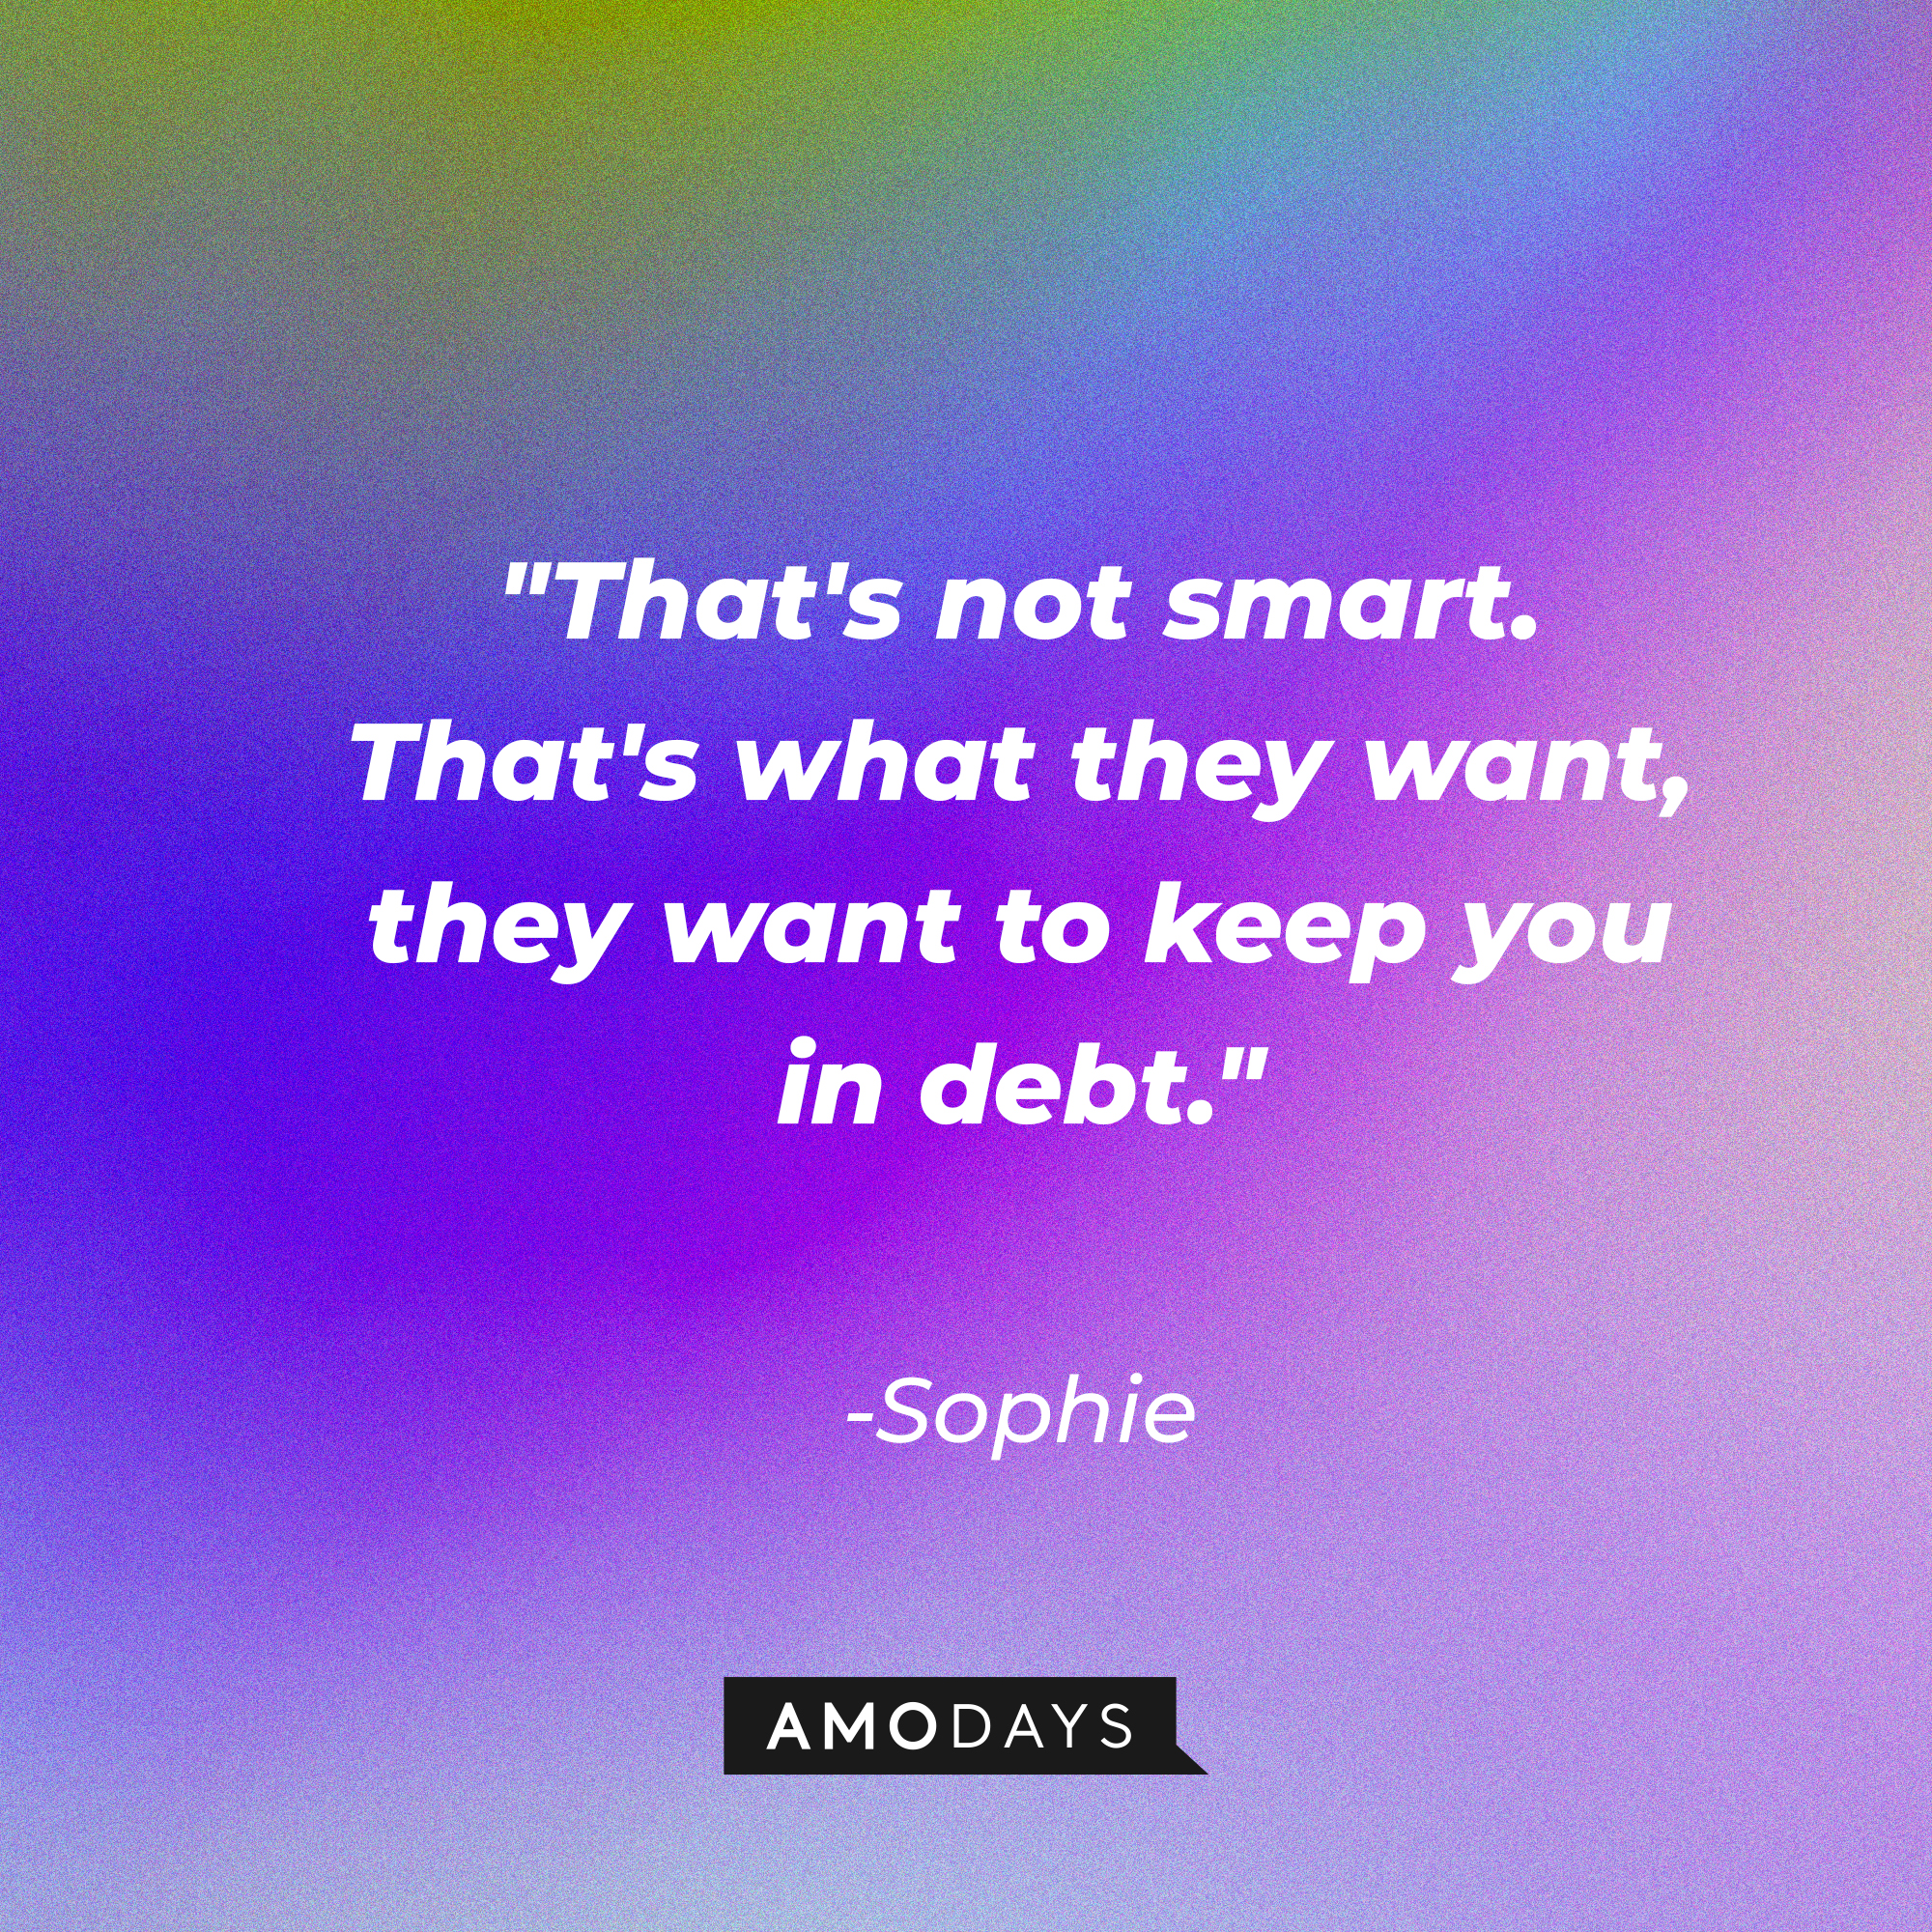 Sophie's quote: "That's not smart. That's what they want, they want to keep you in debt." | Source: AmoDays